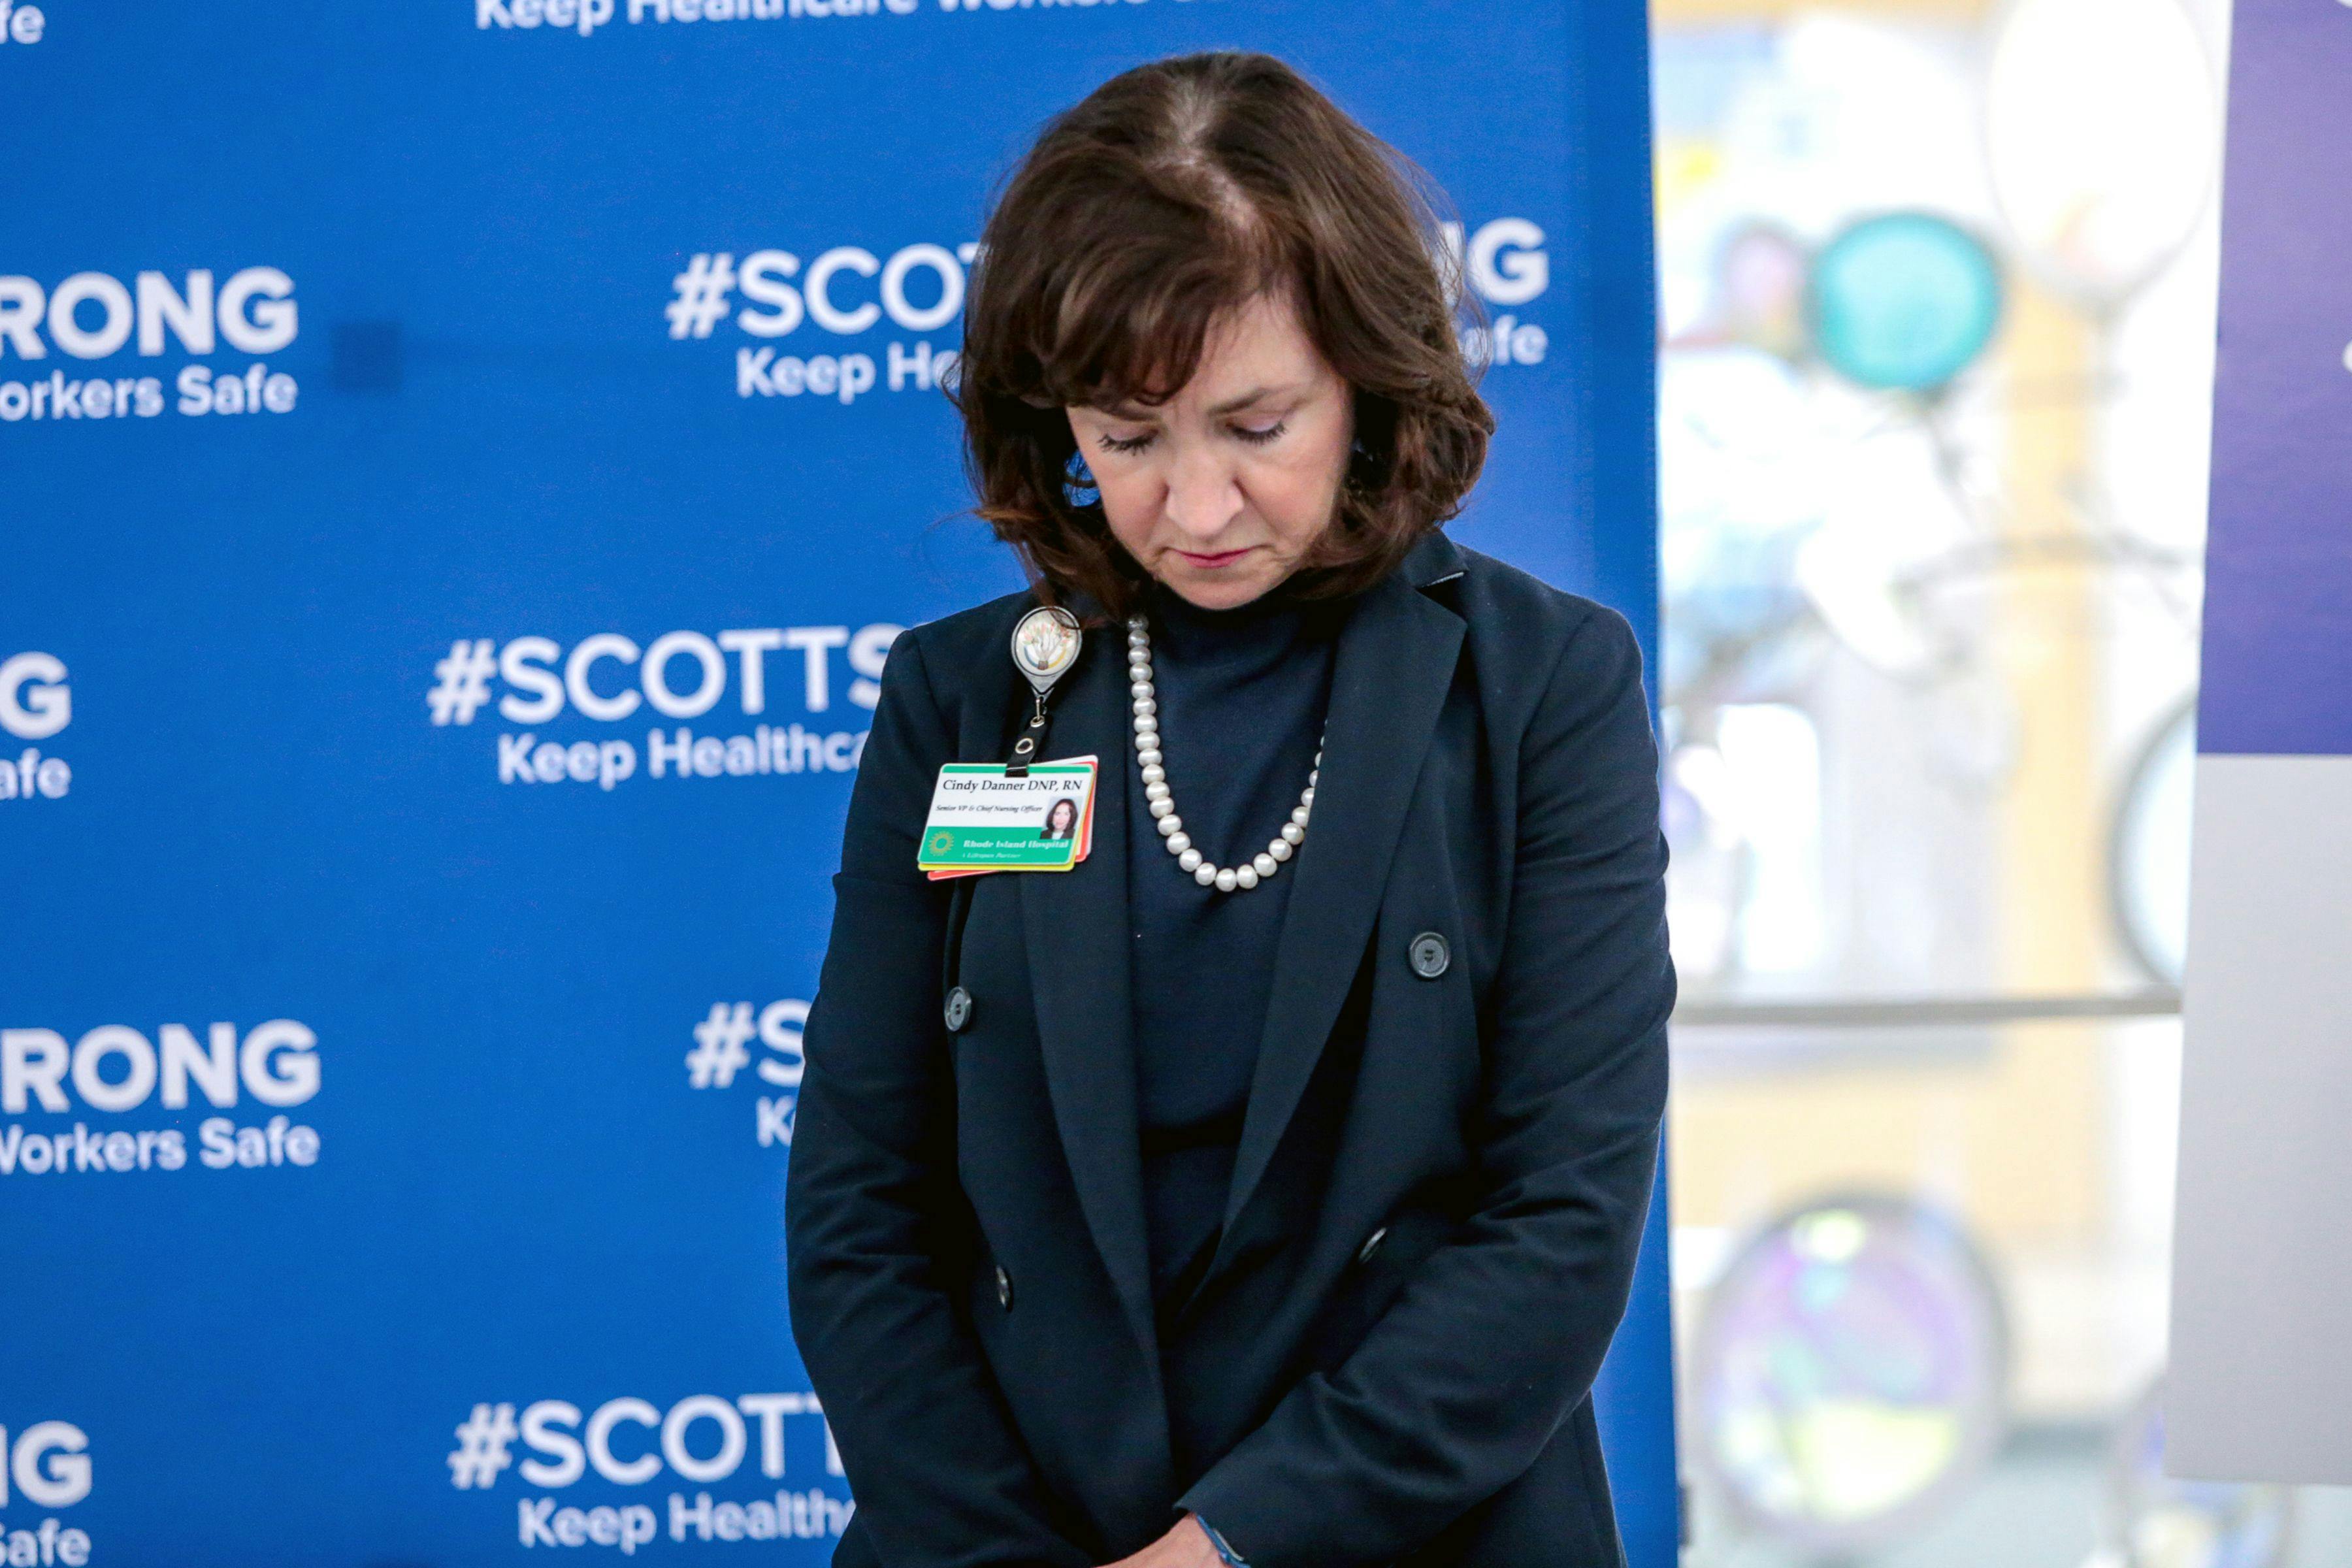 Cynthia Danner, senior vice president and chief nursing officer at Rhode Island Hospital and its Hasbro Children’s Hospital, hopes the ScottStrong campaign will help reduce violence against healthcare workers. (Photo by Bill Murphy of Lifespan)